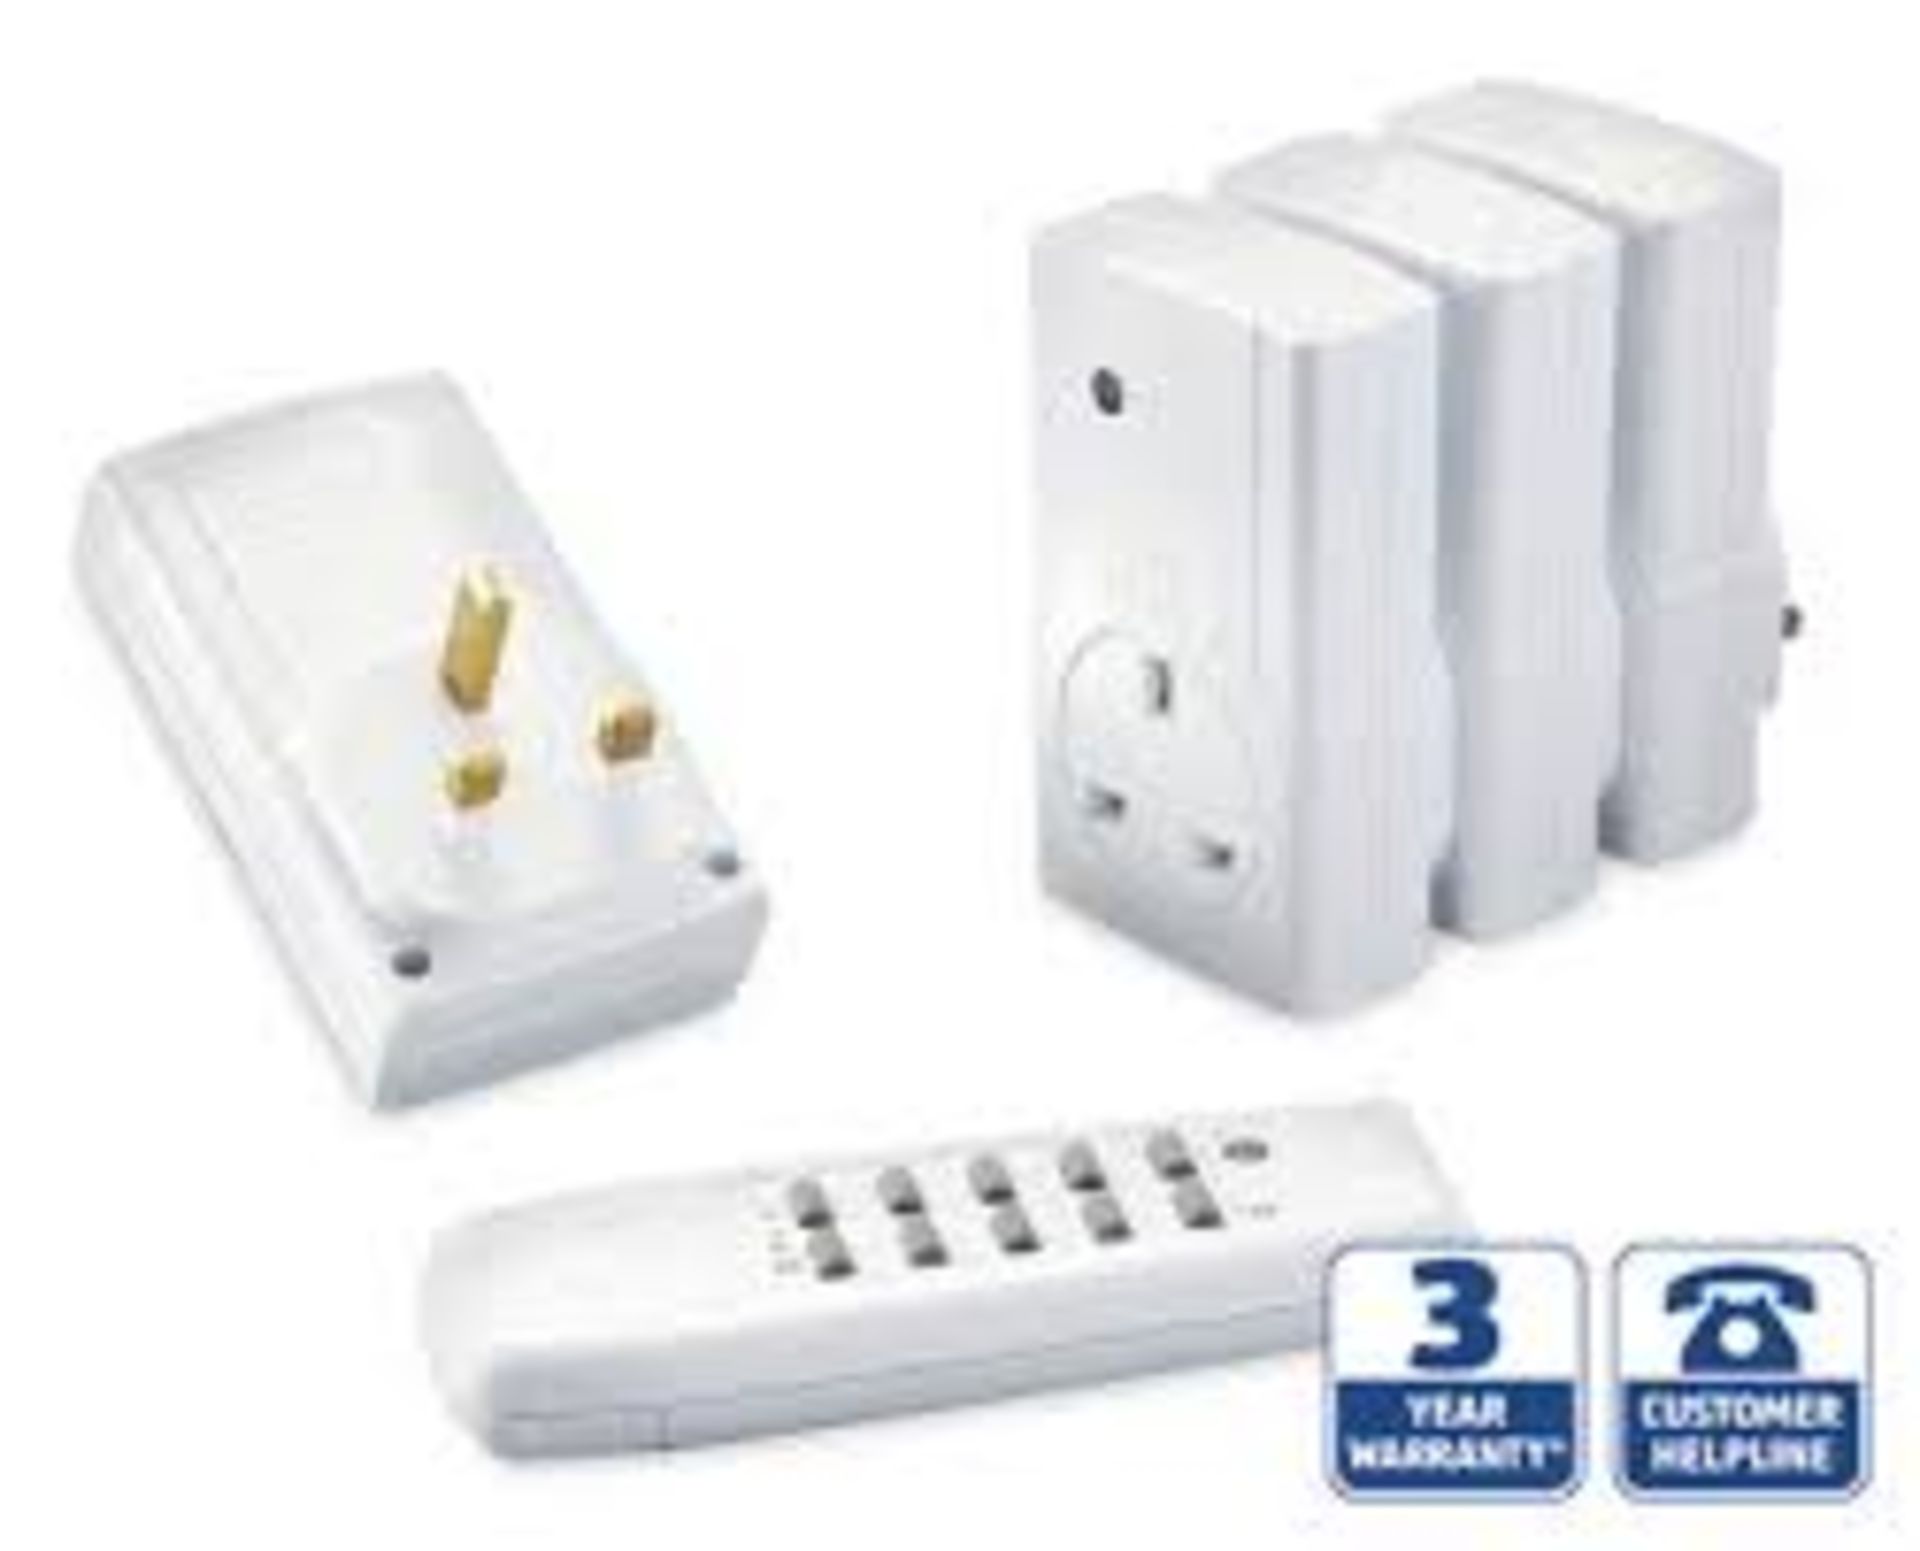 V Brand New Delta High Living Remote Controlled Wall Sockets-4 Socket Receivers-Programmable